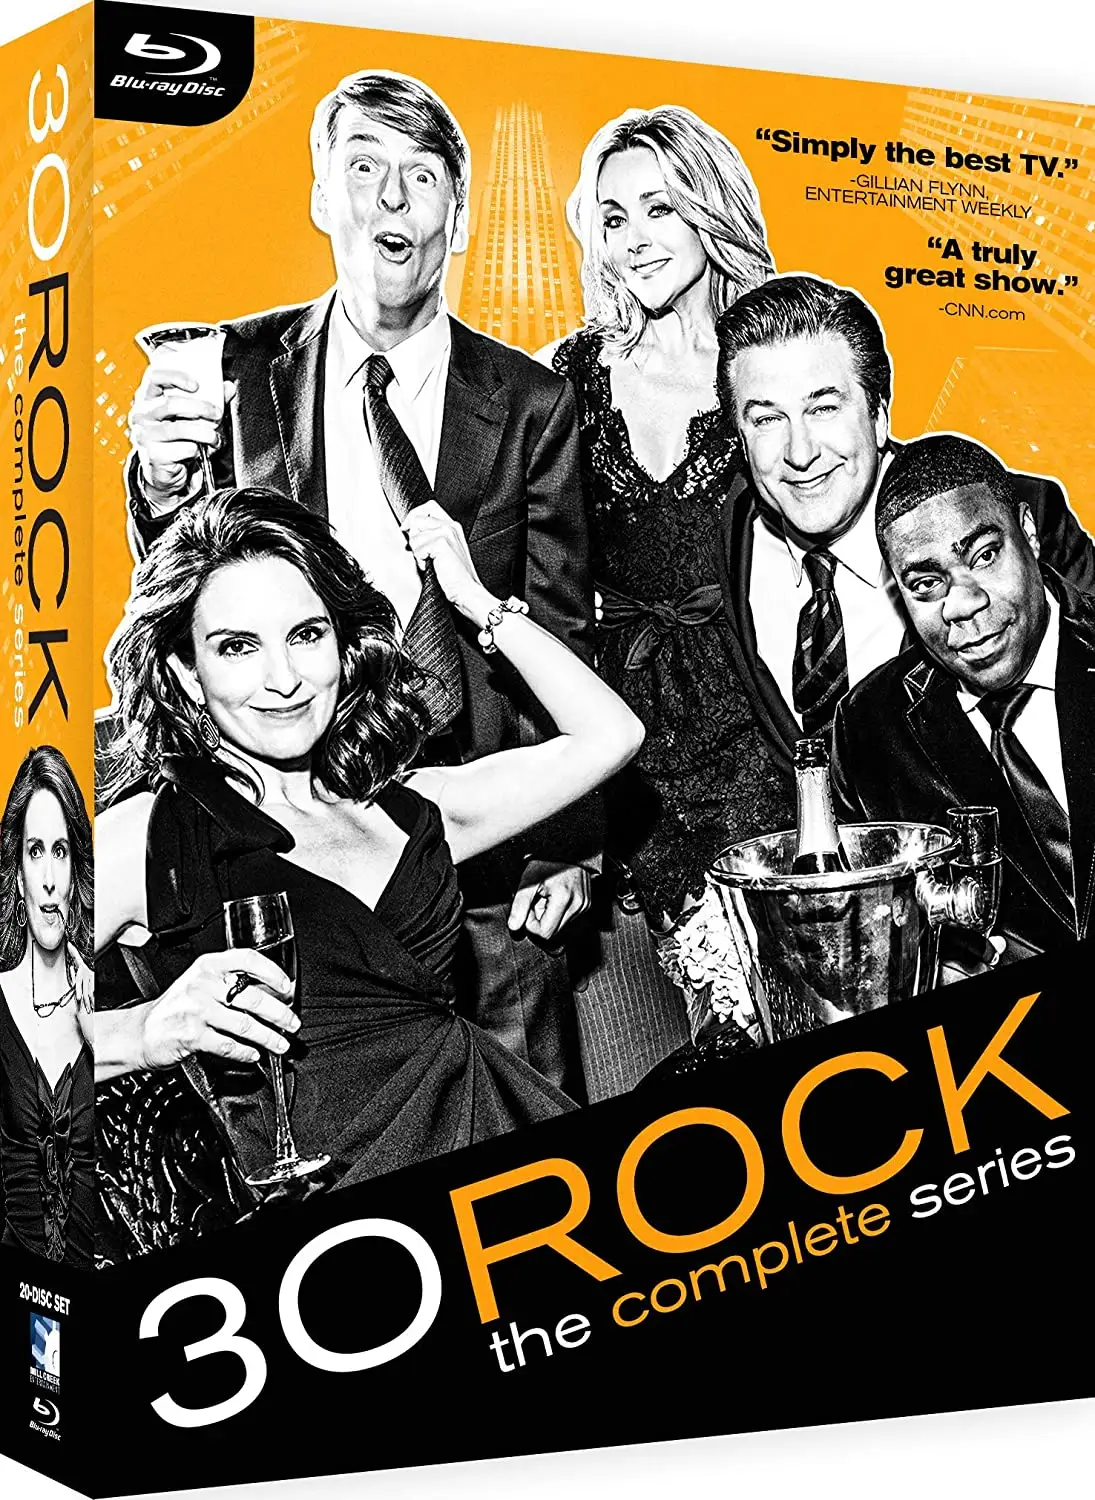 30 Rock: The Complete Series (Blu-ray) Pre-Order